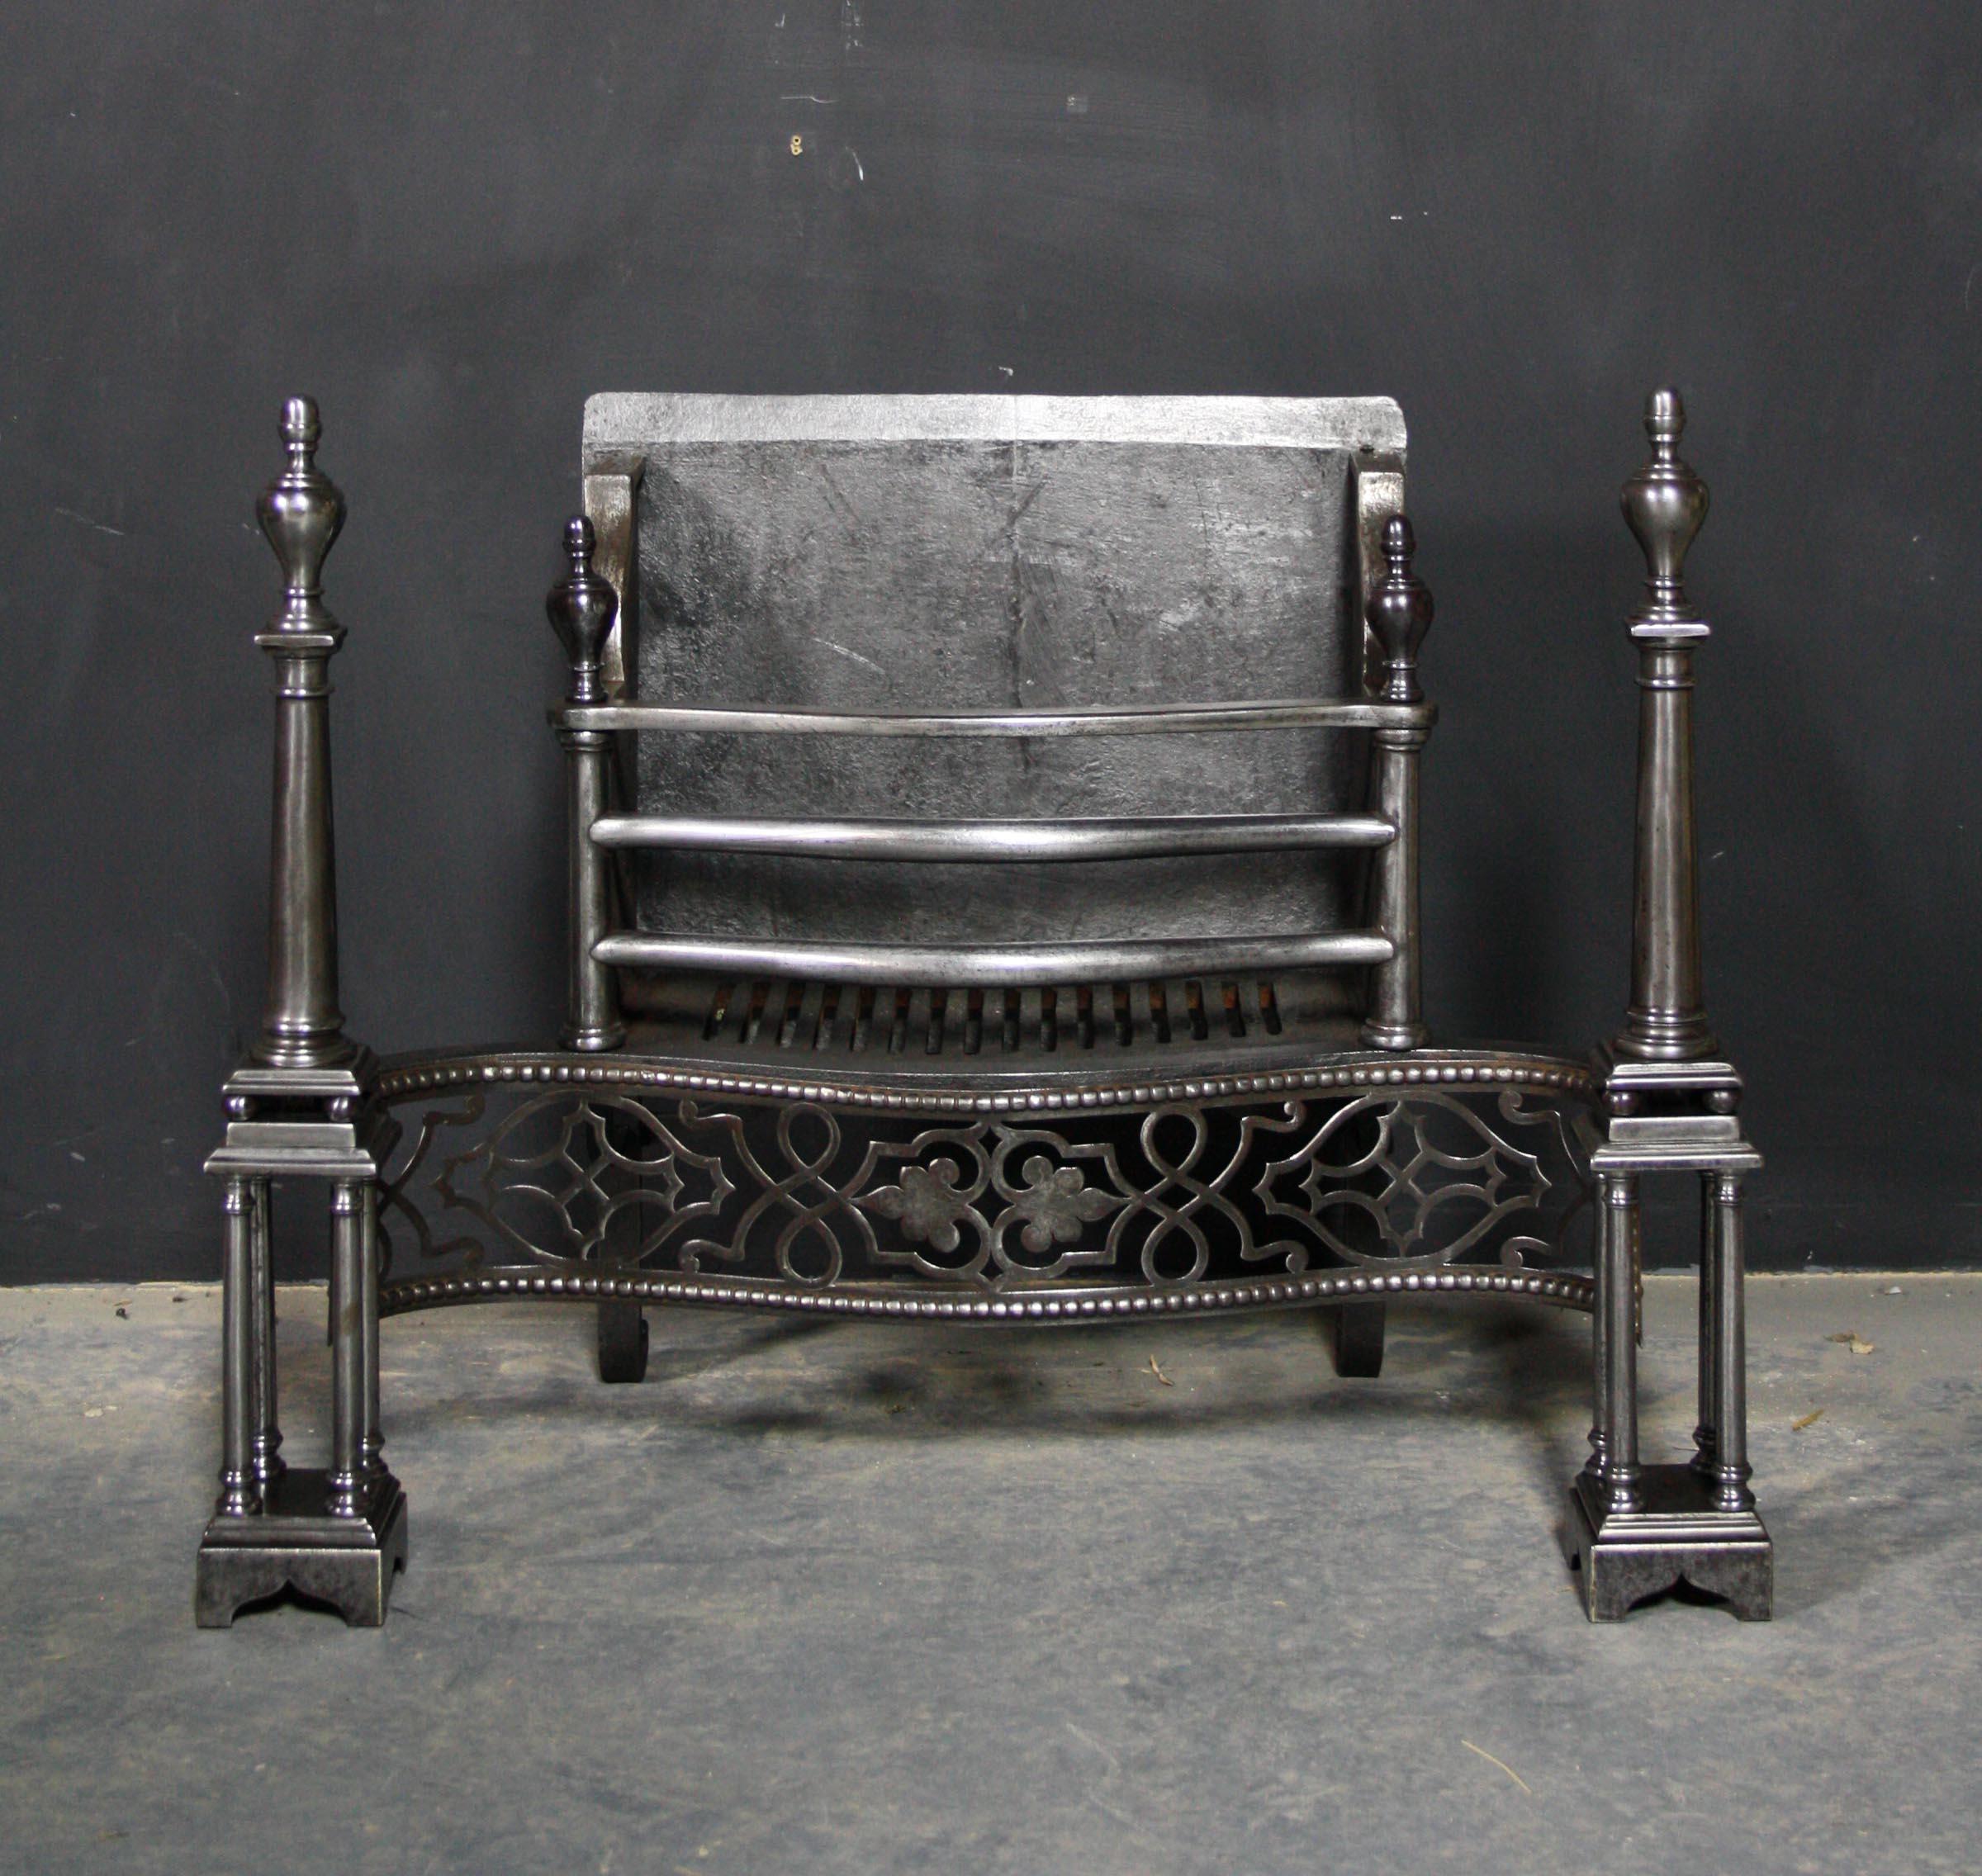 A Late 18th - early 19th century fire grate in the Georgian style. Constructed from polished steel, with a pierced fret and quadruple columns.